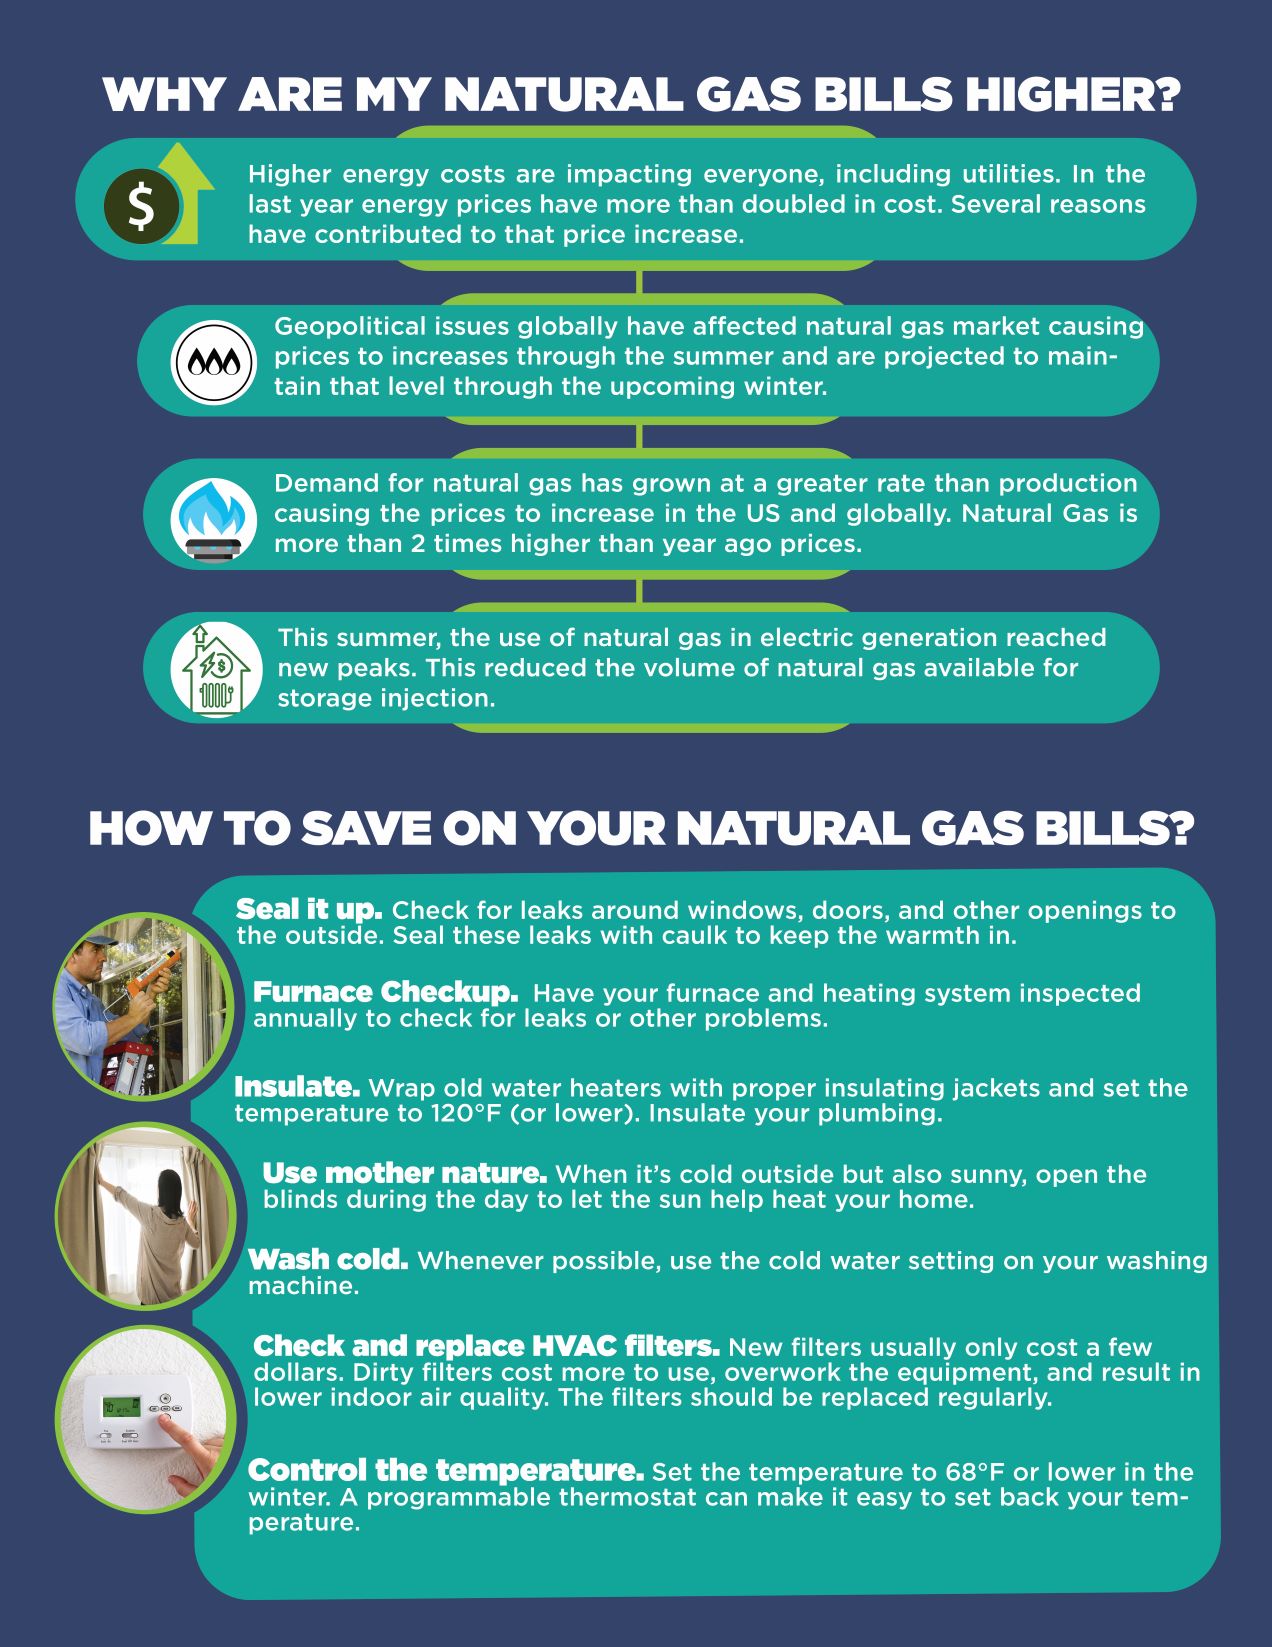 Why are my natural gas bills higher?